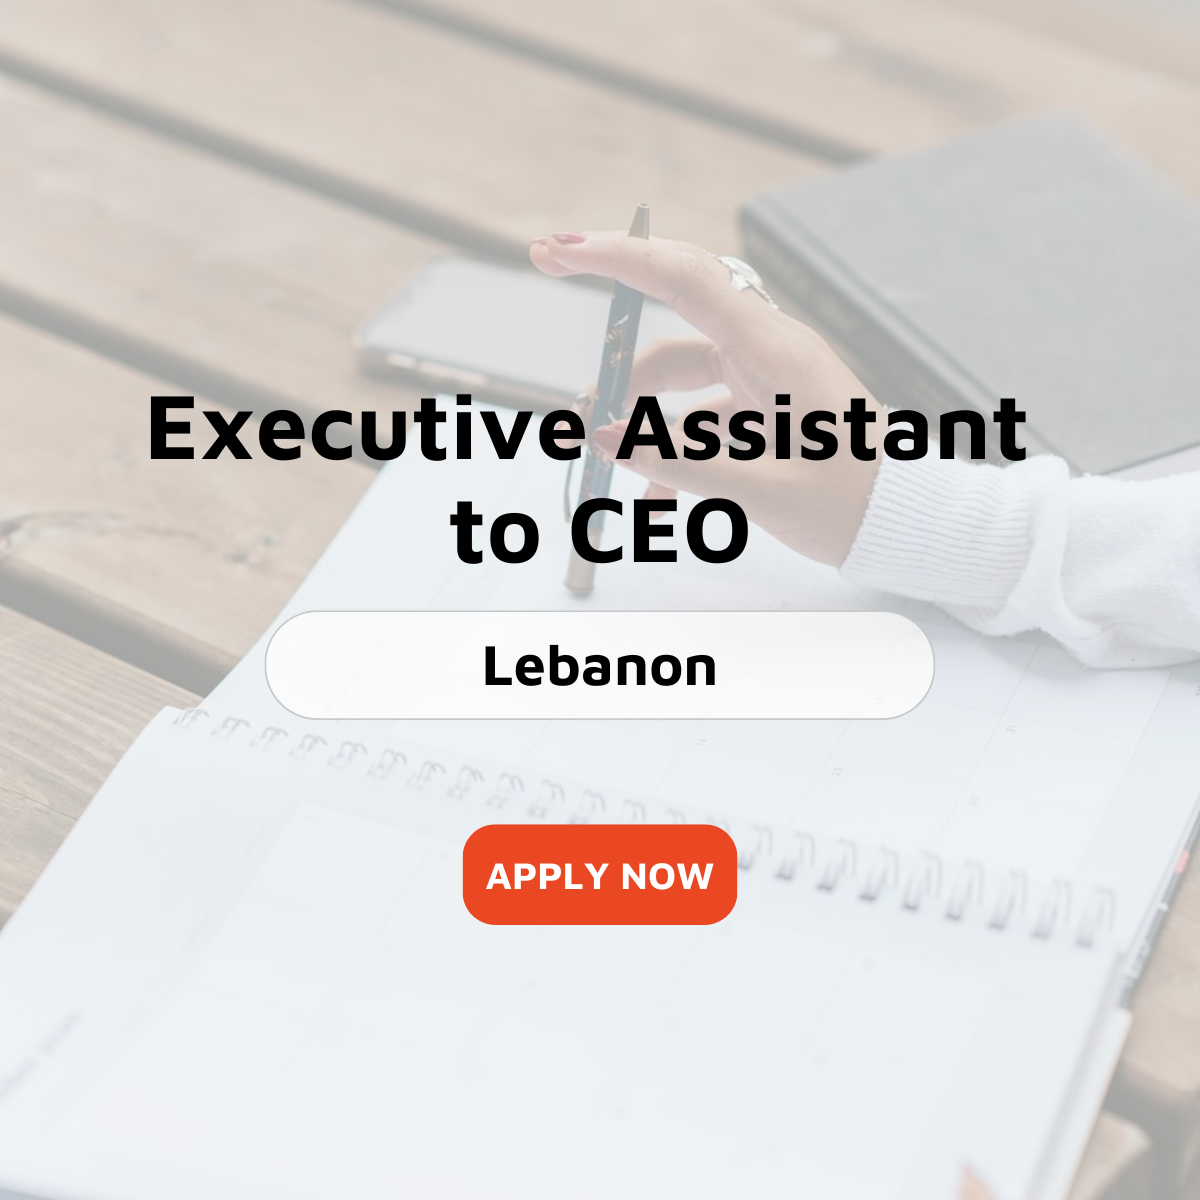 Executive Assistant to CEO